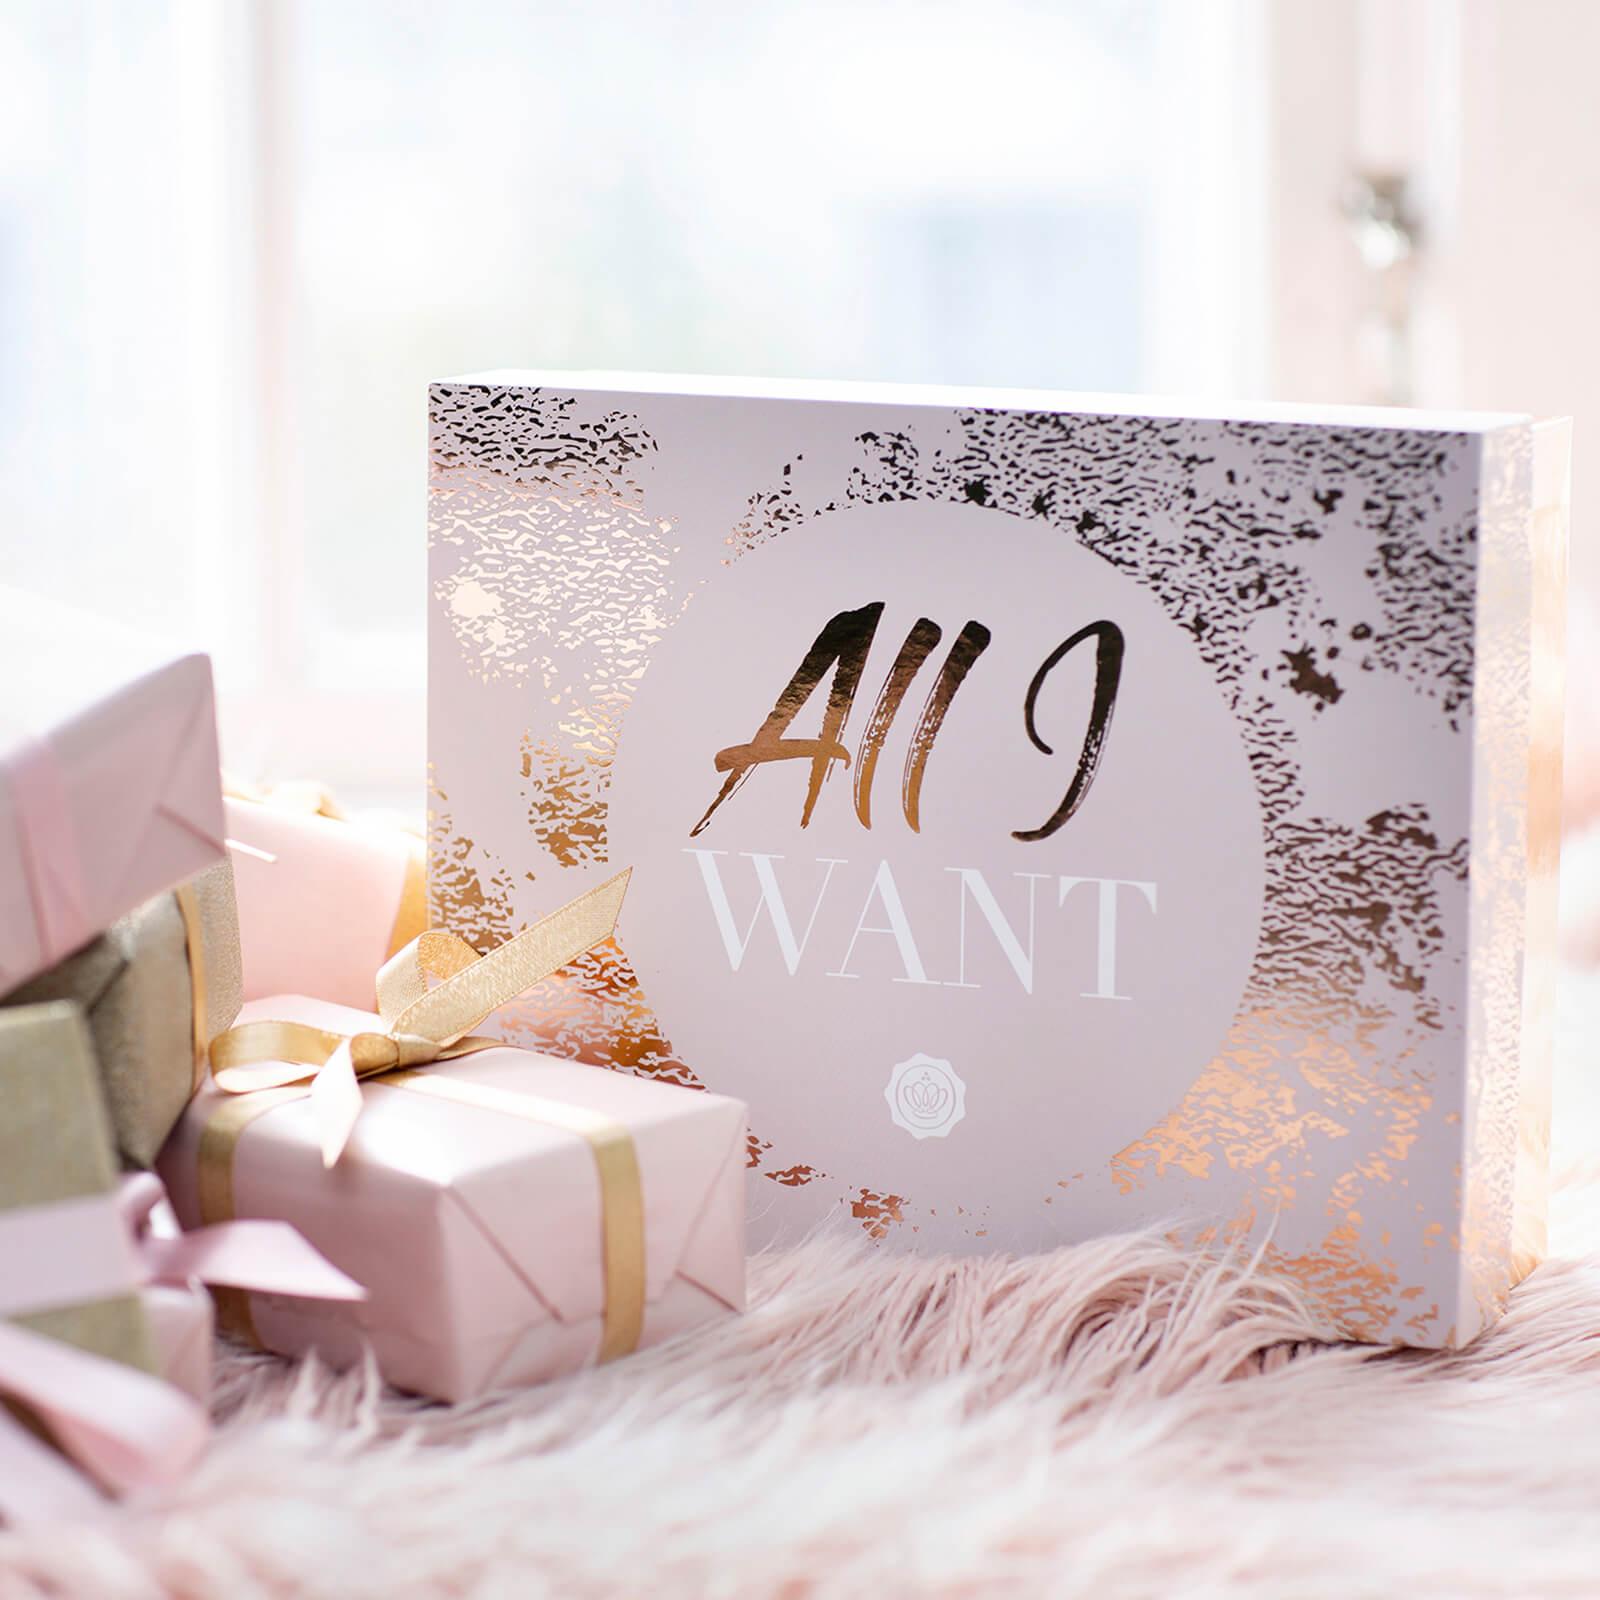 GLOSSYBOX Limited Edition “All I Want” Holiday Box – On Sale Now!